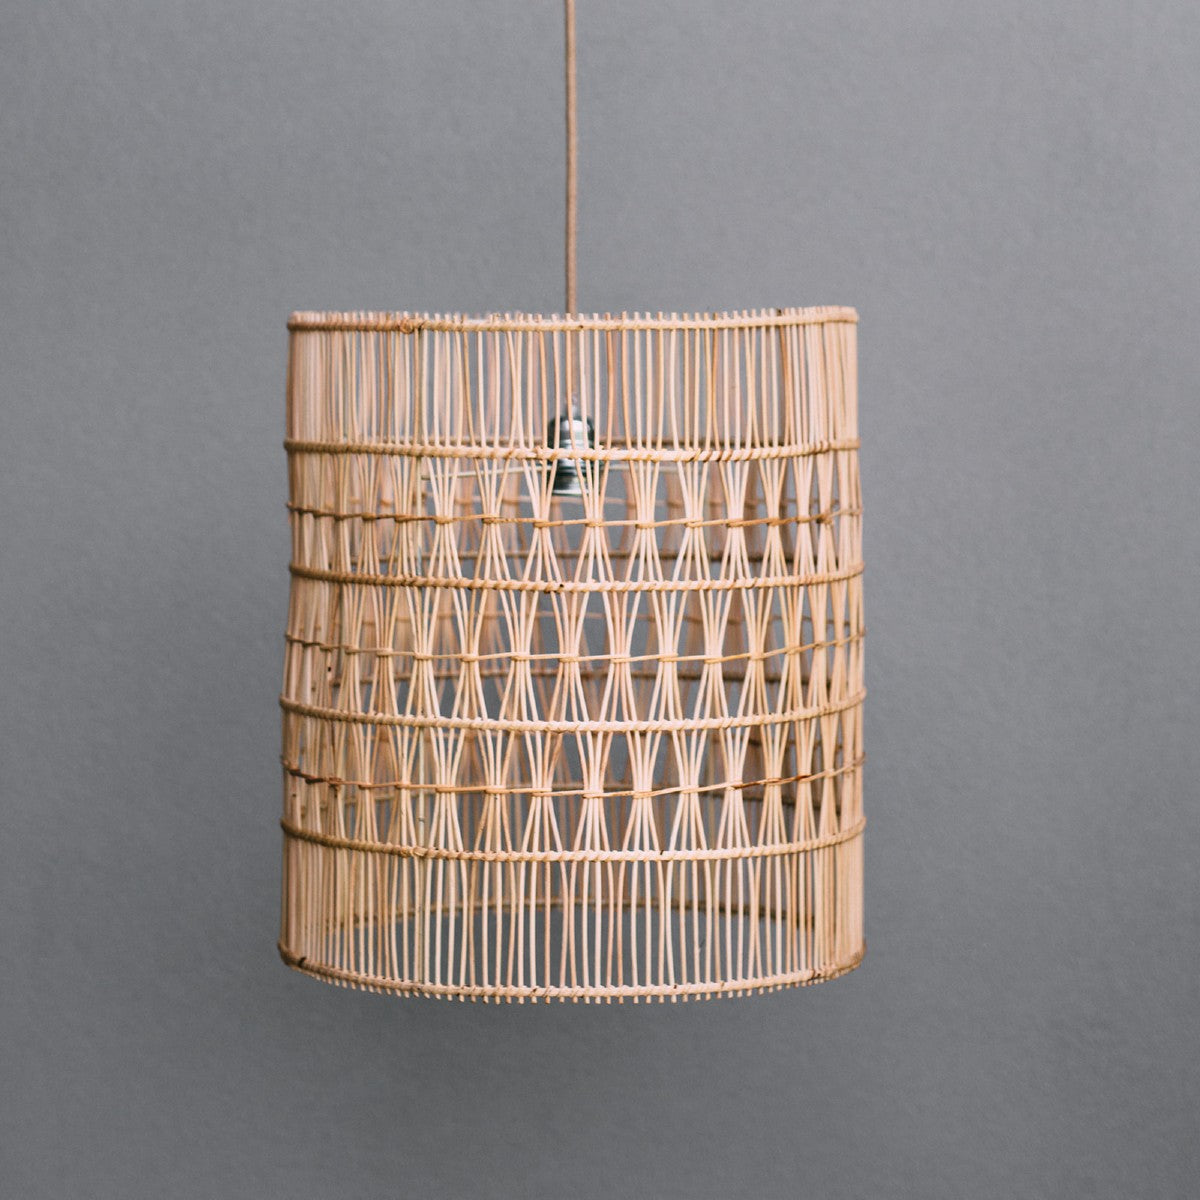 natural-woven-rattan-light-shade-cylindrical